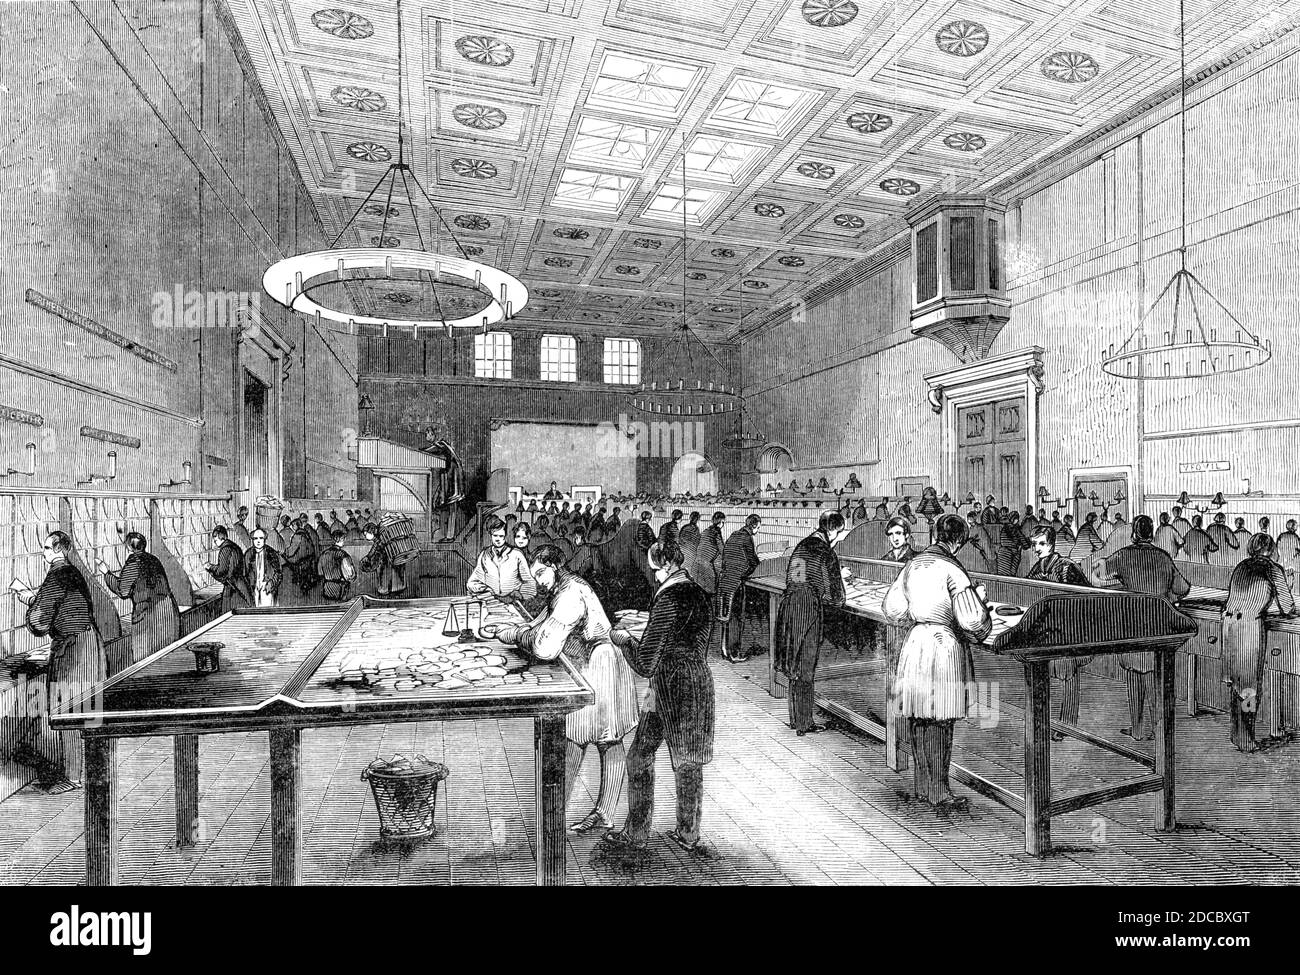 The General Post-Office; The Inland Letter Office, 1844. Workers in the main post office at St Martin's Le Grand in London. 'The inland sorters' room...is well ventilated...in height it is about seventy-eight feet. In the central portion of the roof is an extensive sky-light, which, with three sash-windows near the top of the walls at each end, are the only places where the light of day is admitted. At the southern end of this spacious room is placed a long table, transversely fixed, upon which the letters are thrown as they are from time to time received from the boxes or brought into the off Stock Photo